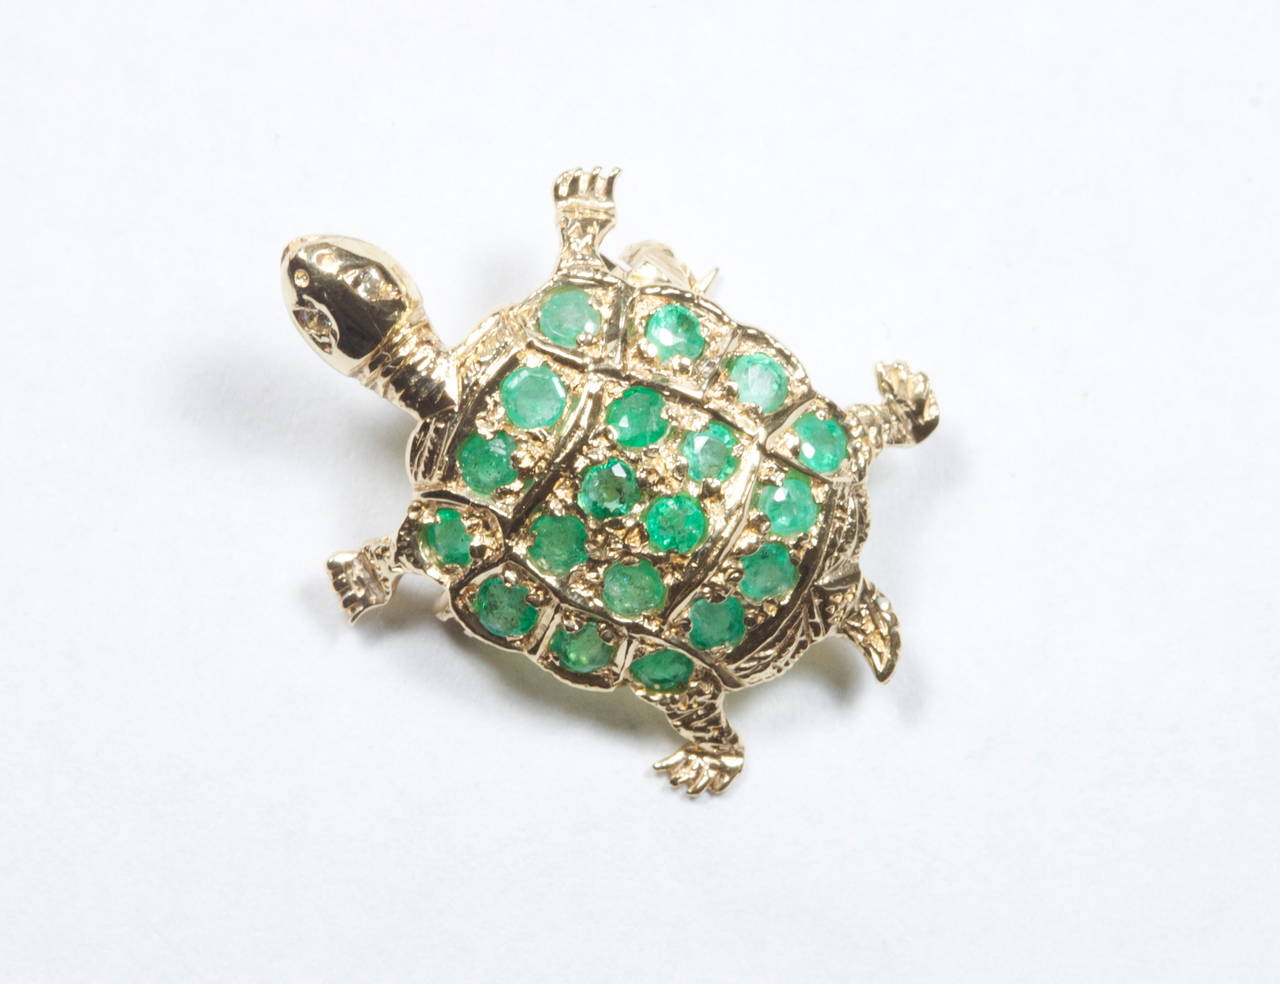 This adorable mini turtle is decorated with 19 forest green round cut emeralds bringing the shell to life with color. The dimensions of the turtle are 1